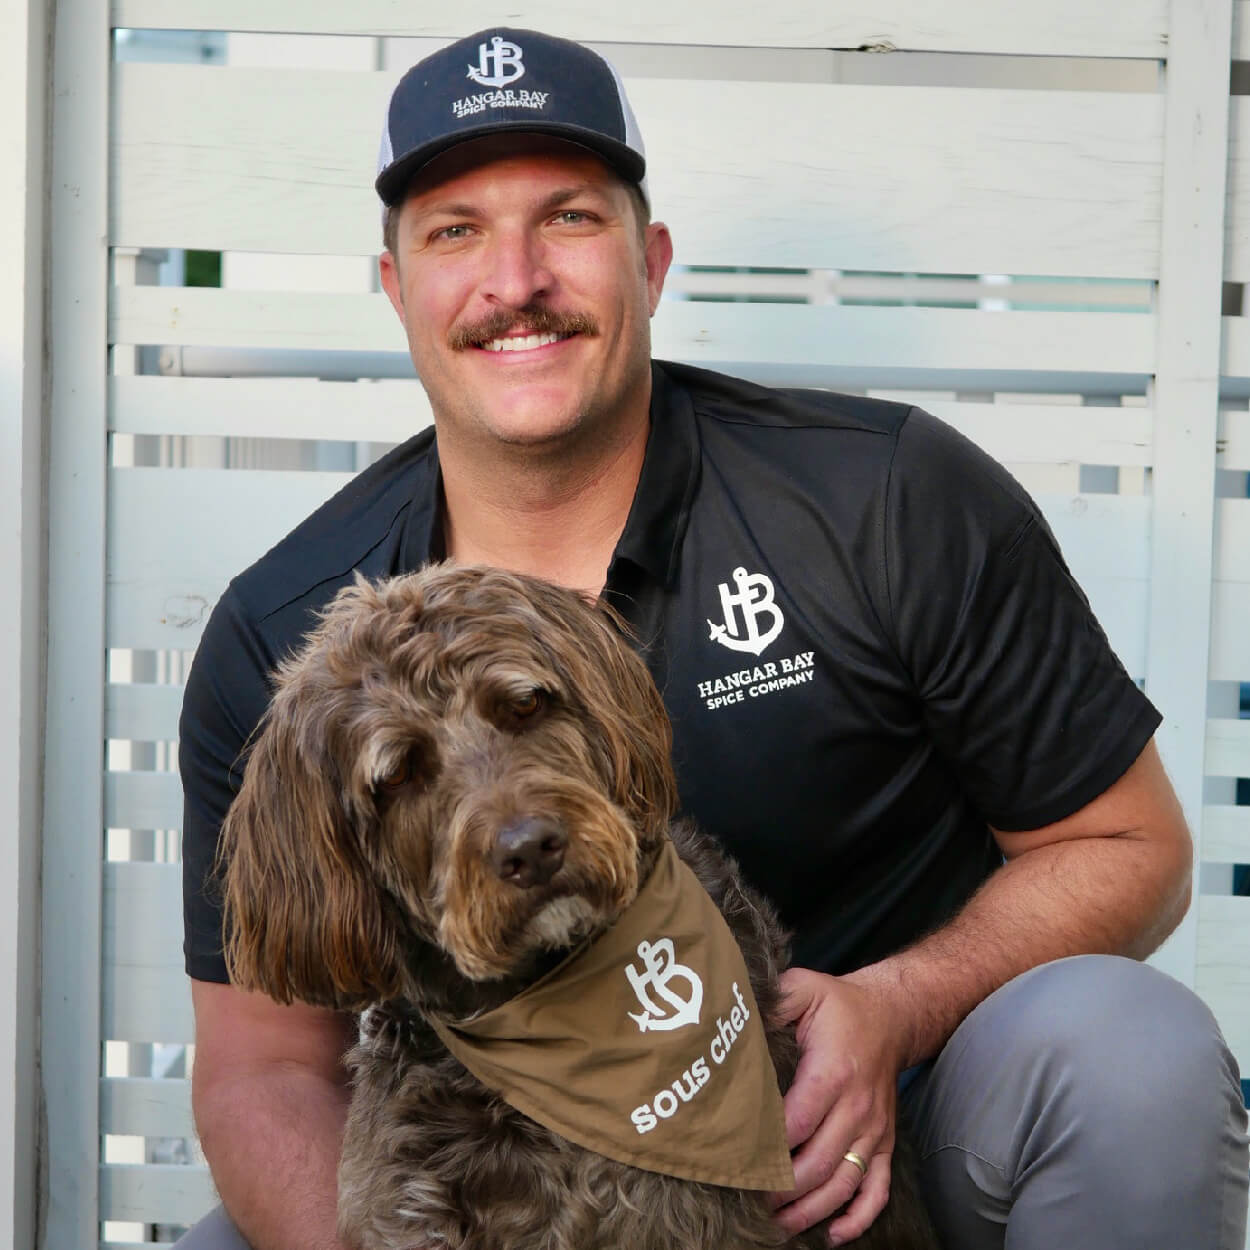 BIFF, Hangar Bay Spice Founder and his dog wearing Hangar Bay merch in front of white fence